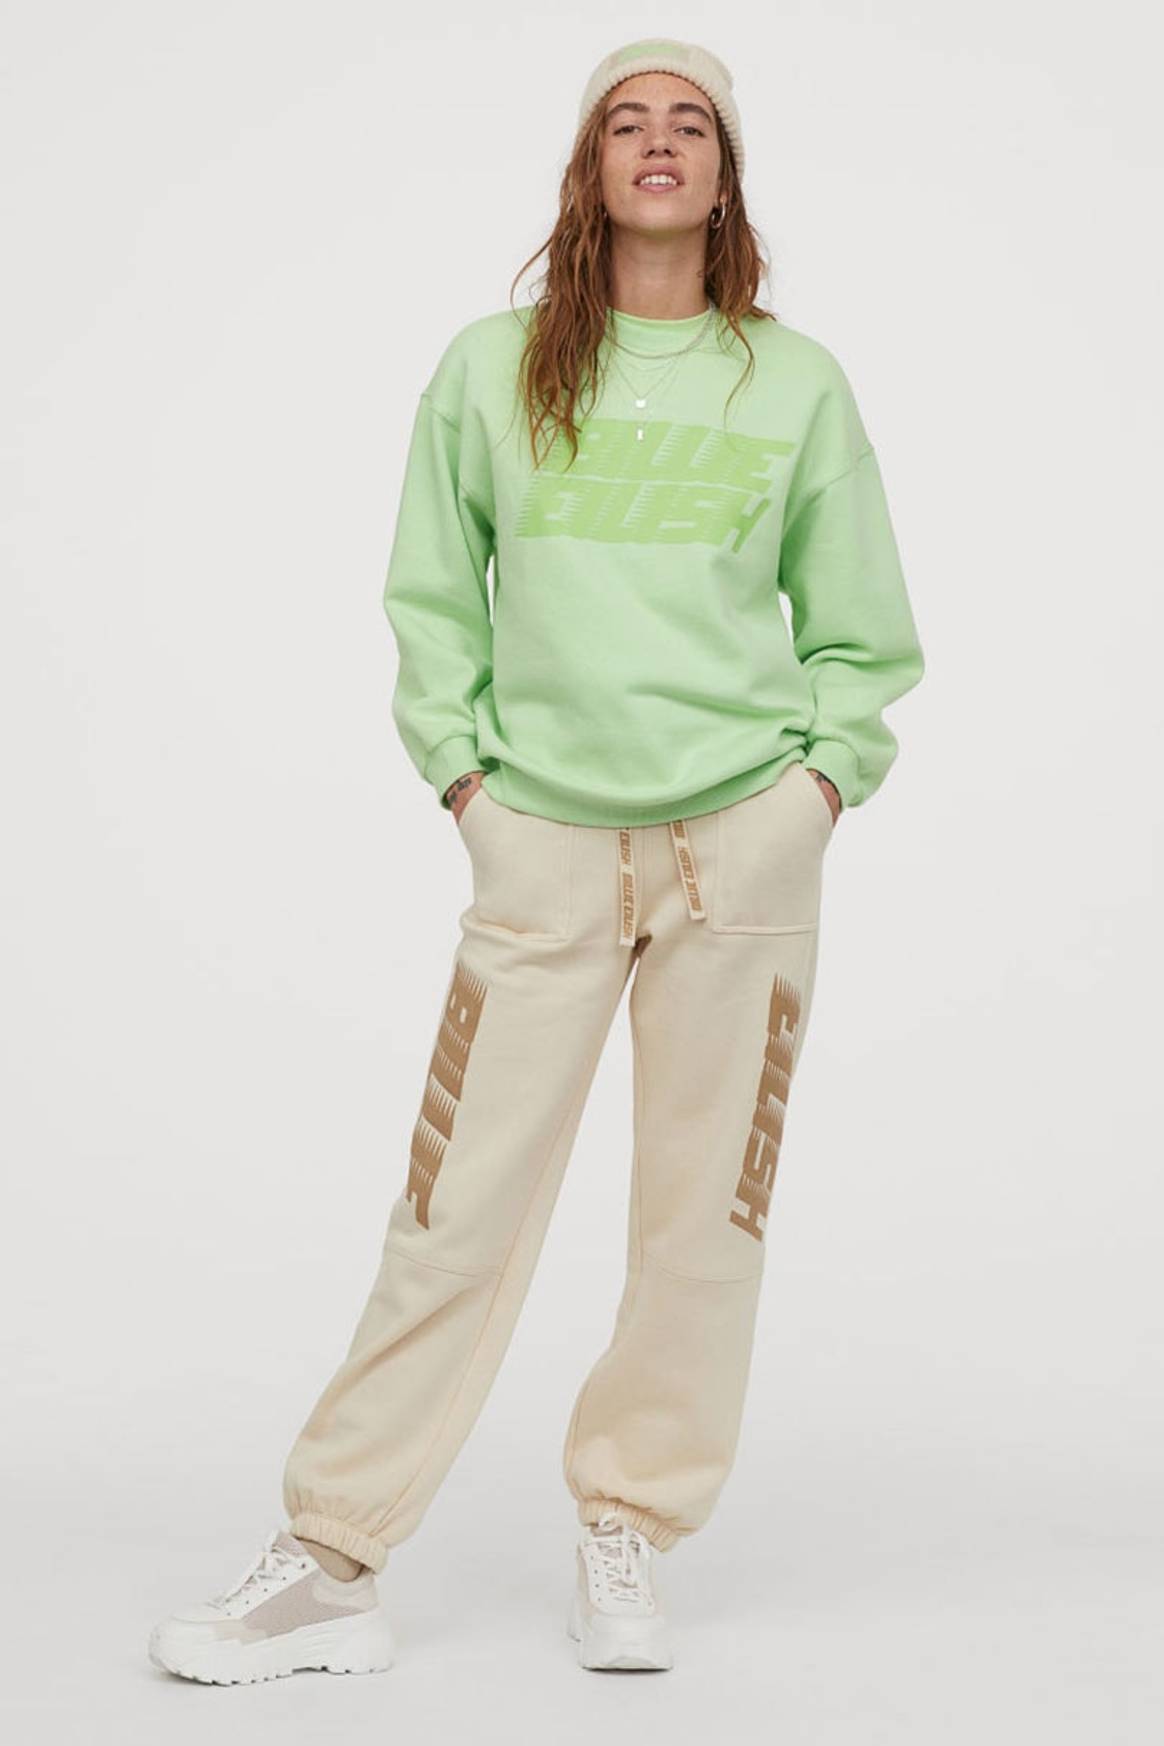 H&M collaborates with Billie Eilish on sustainable merch line